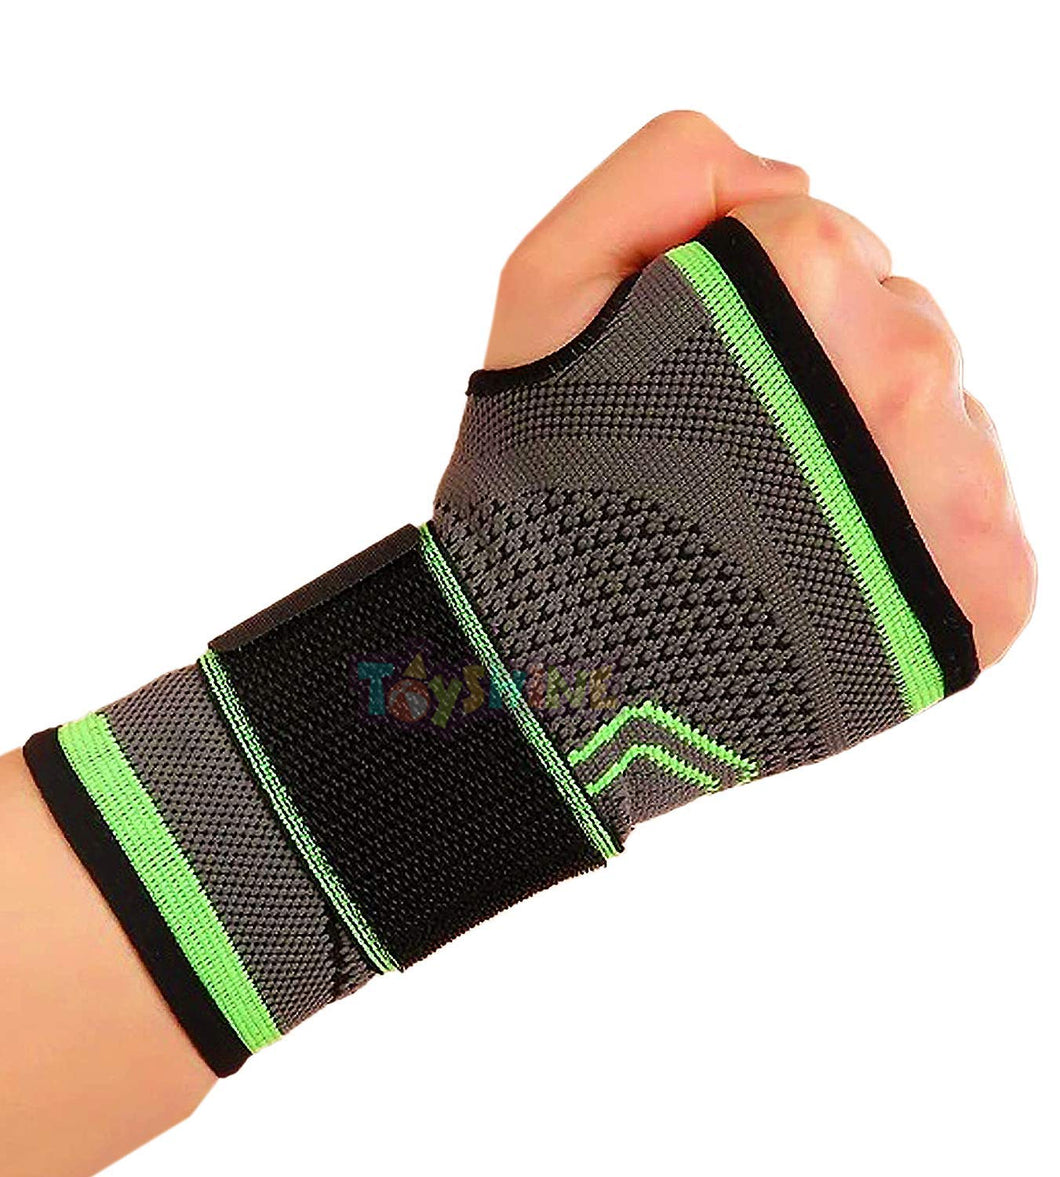 Toyshine Fitness Compression Support Brace Big Size for Palm, Hand, and Wrist for Carpal Tunnel and Support (SSTP) - B